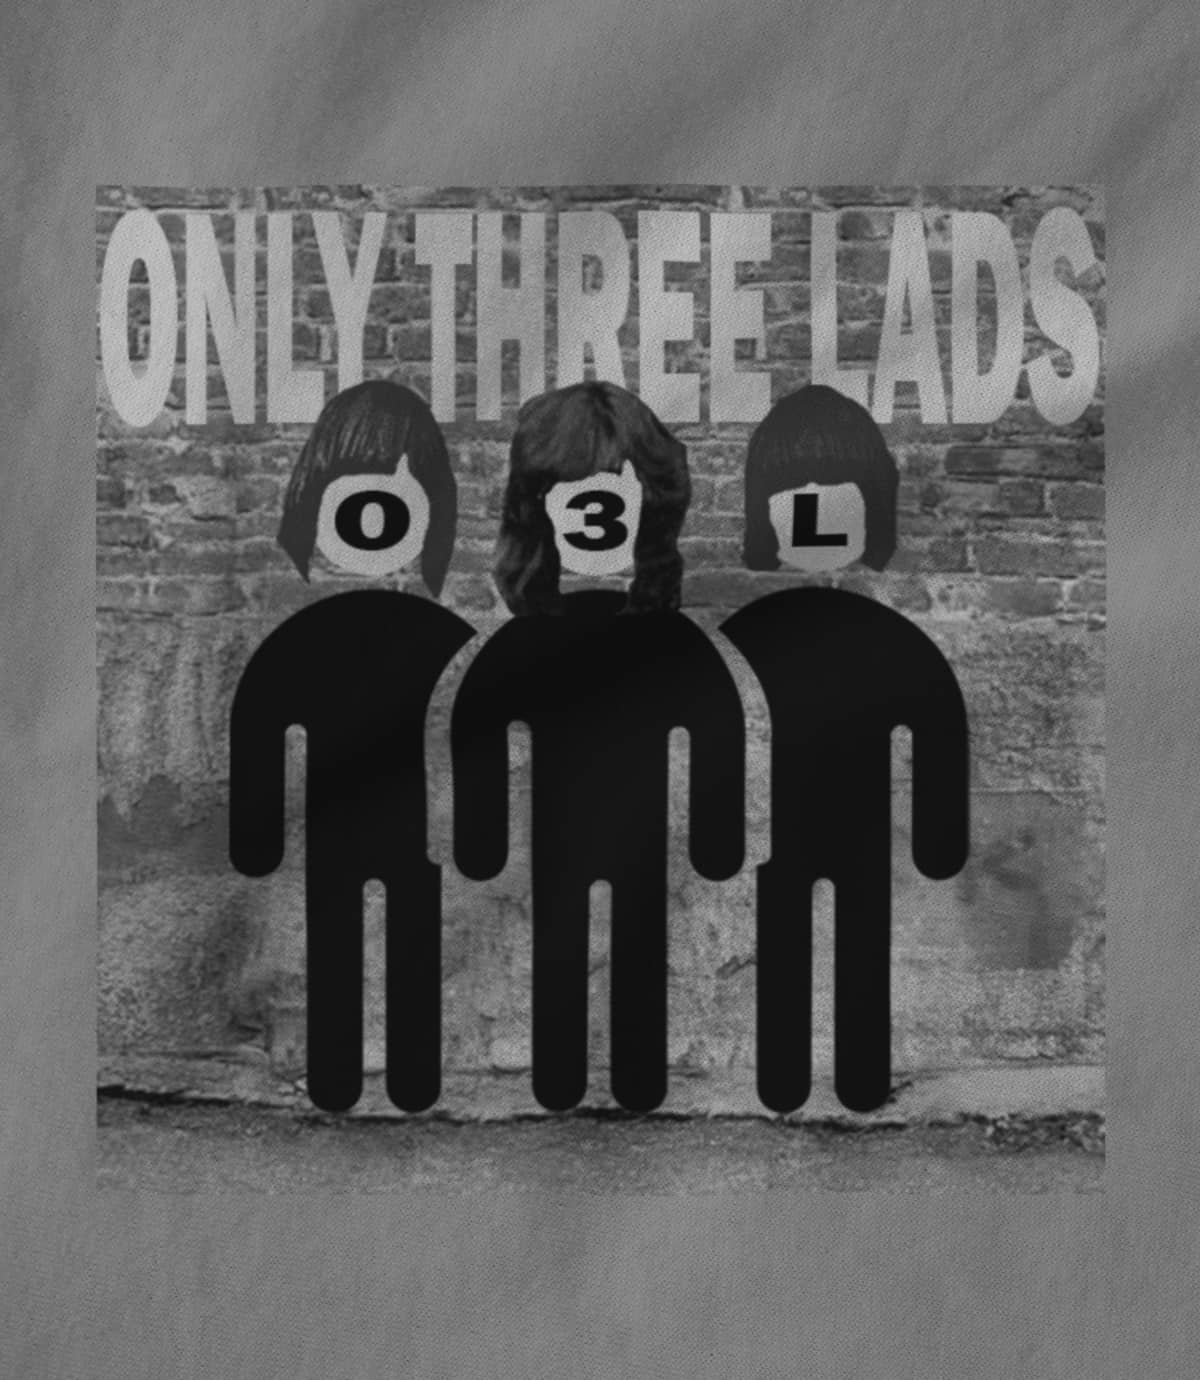 Only three lads faux mones  grey  1582937554